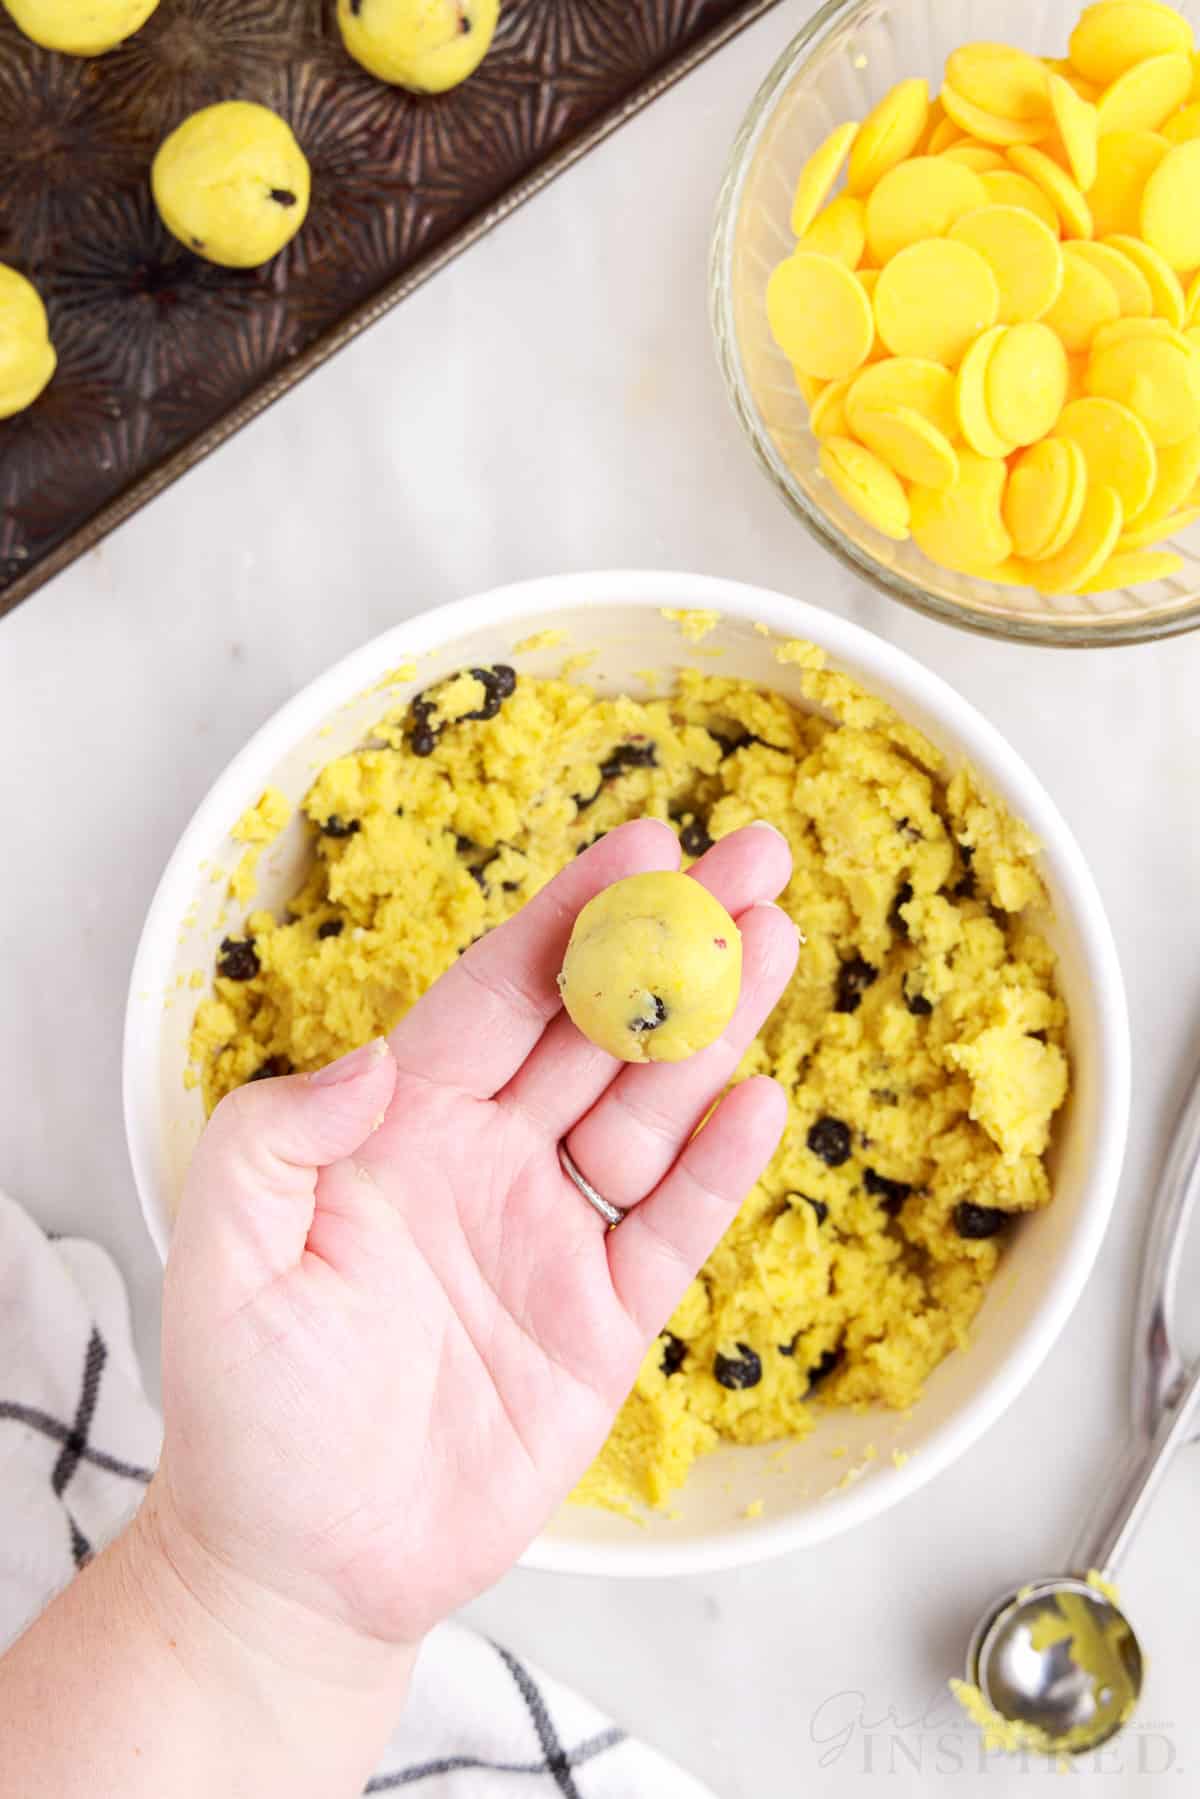 Ball of lemon blueberry cheesecake mixture in palm of hand.